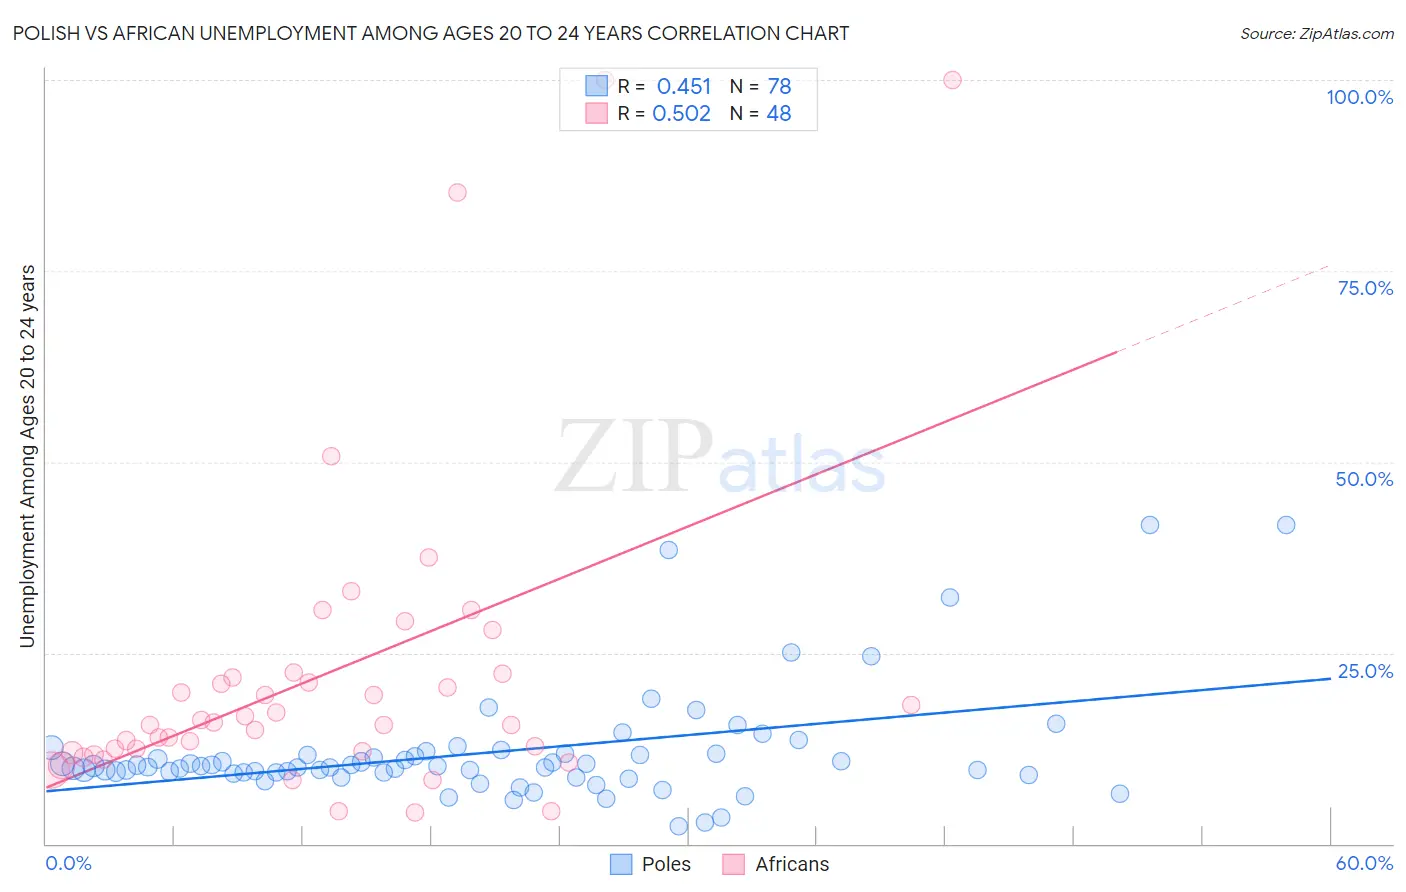 Polish vs African Unemployment Among Ages 20 to 24 years